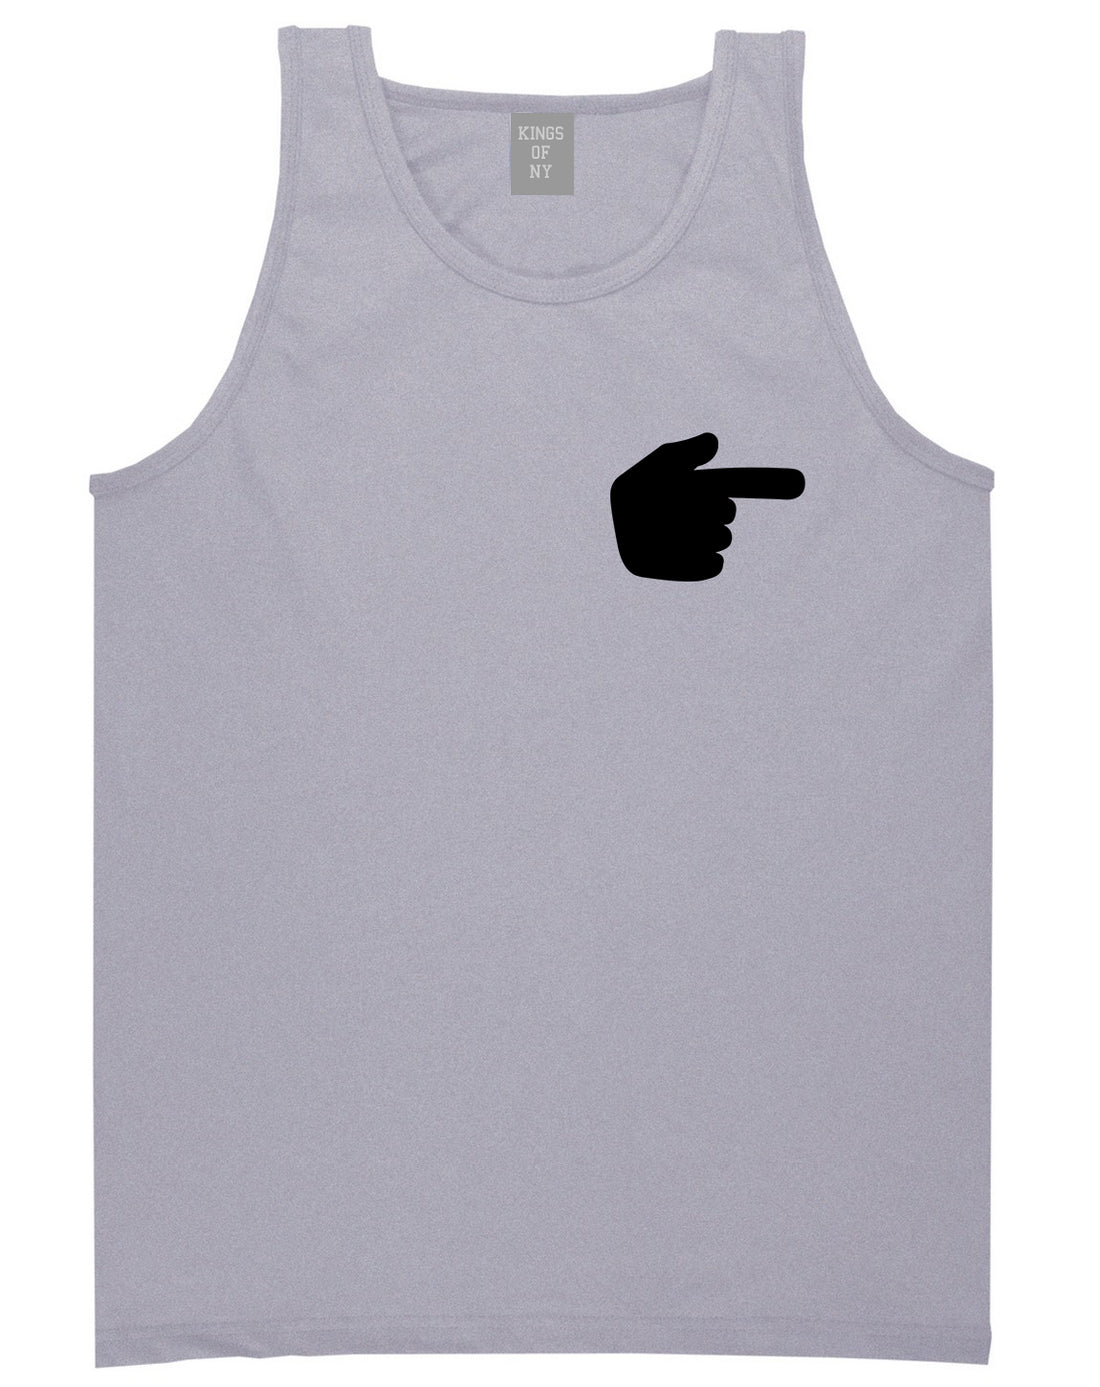 Datway_Pointing_Finger_Emoji_Chest Mens Grey Tank Top Shirt by Kings Of NY